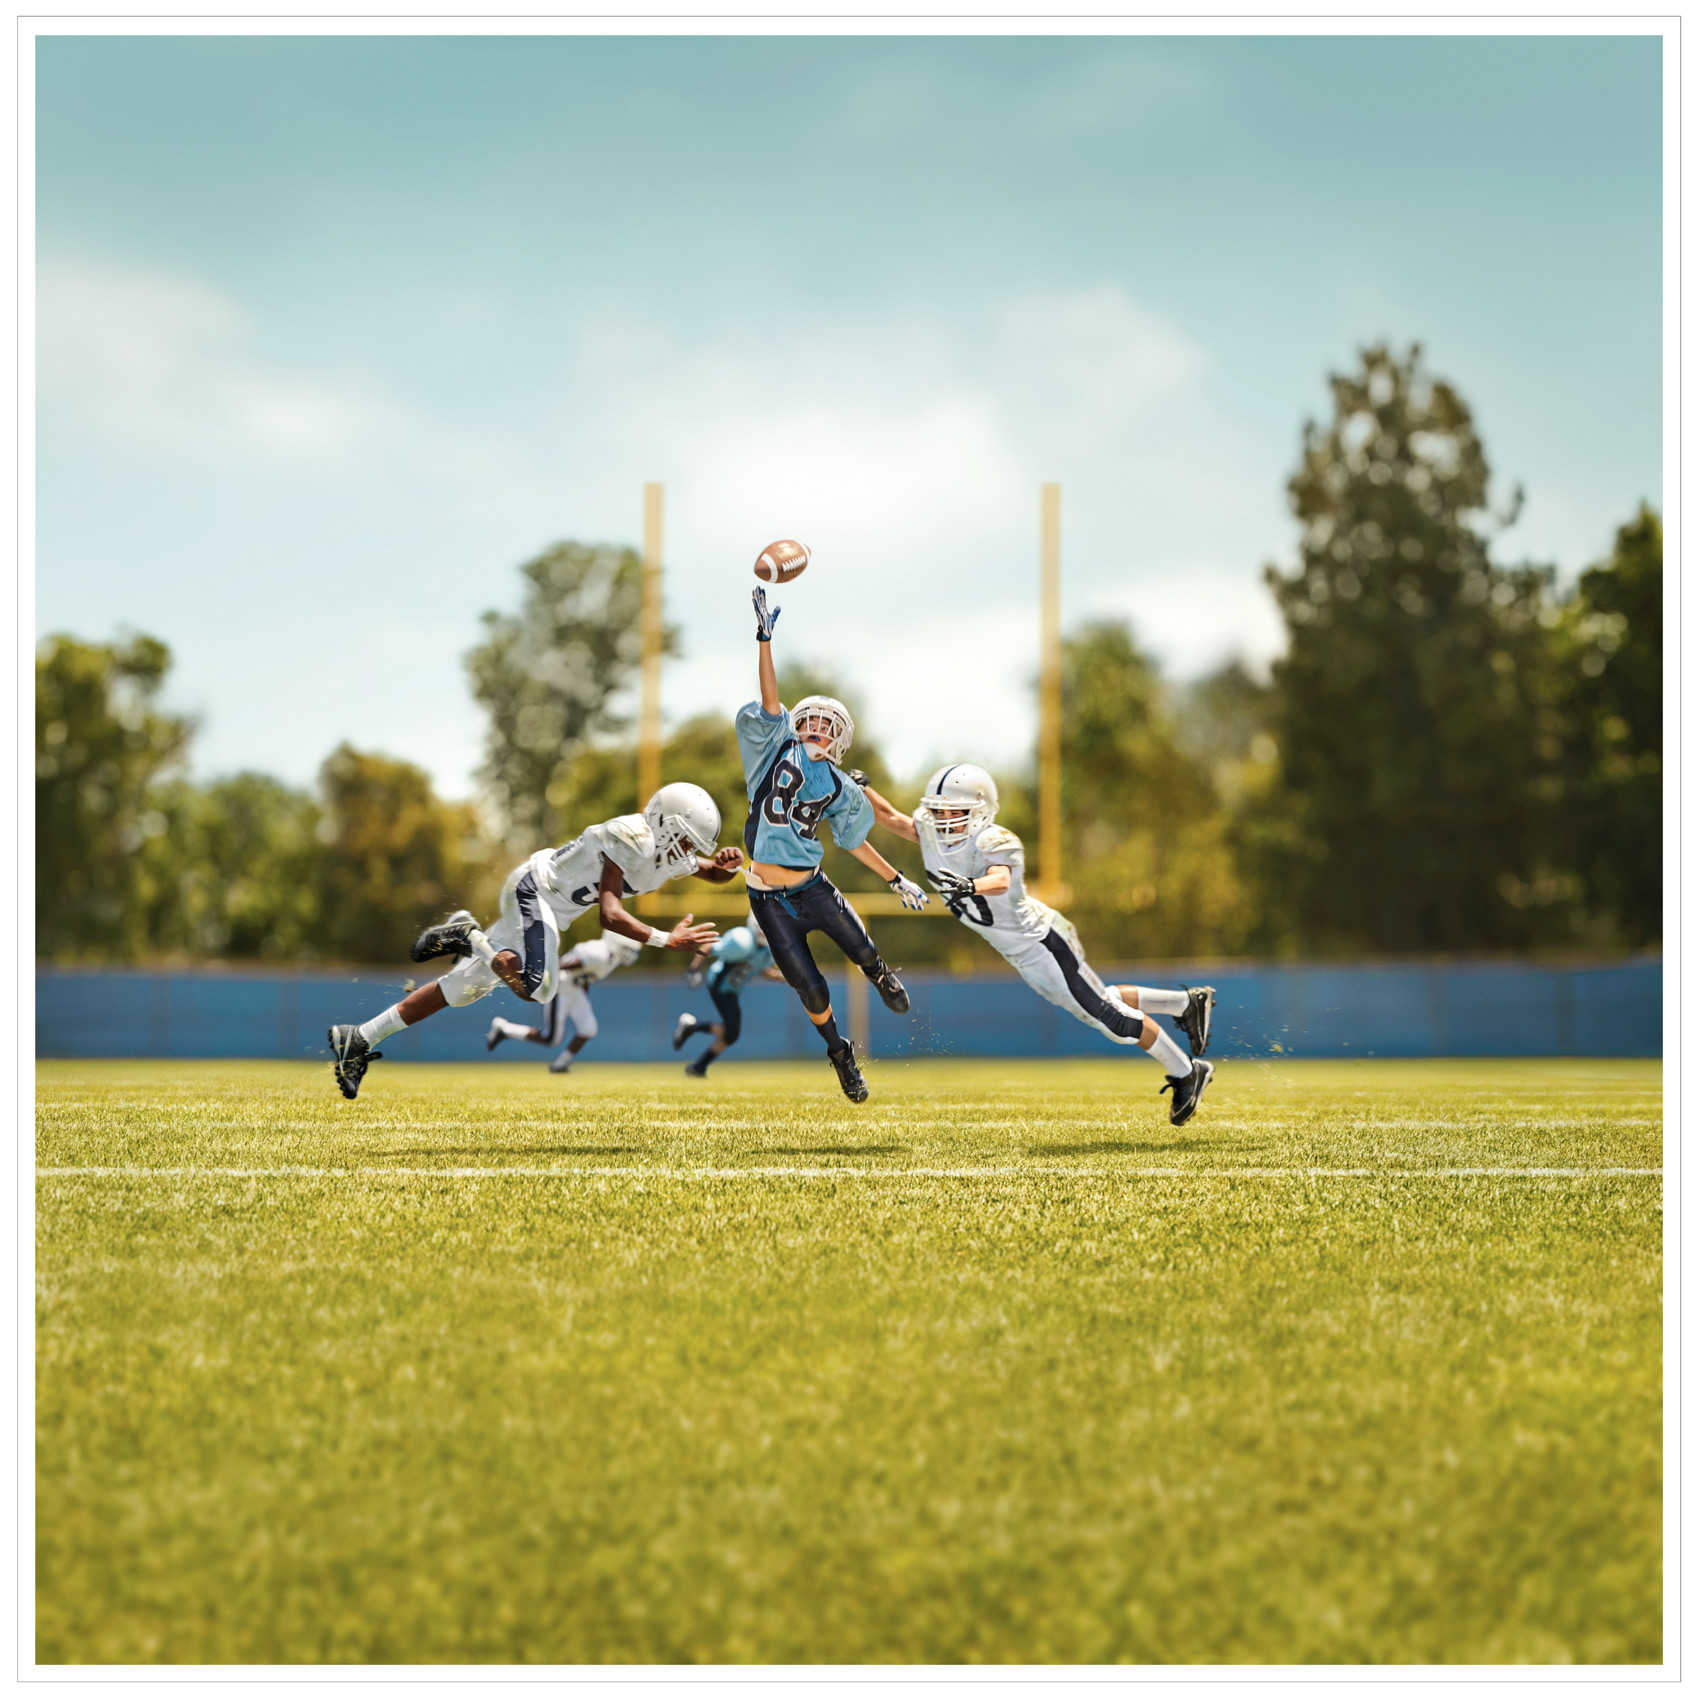 Boys playing football - print campaign for Children